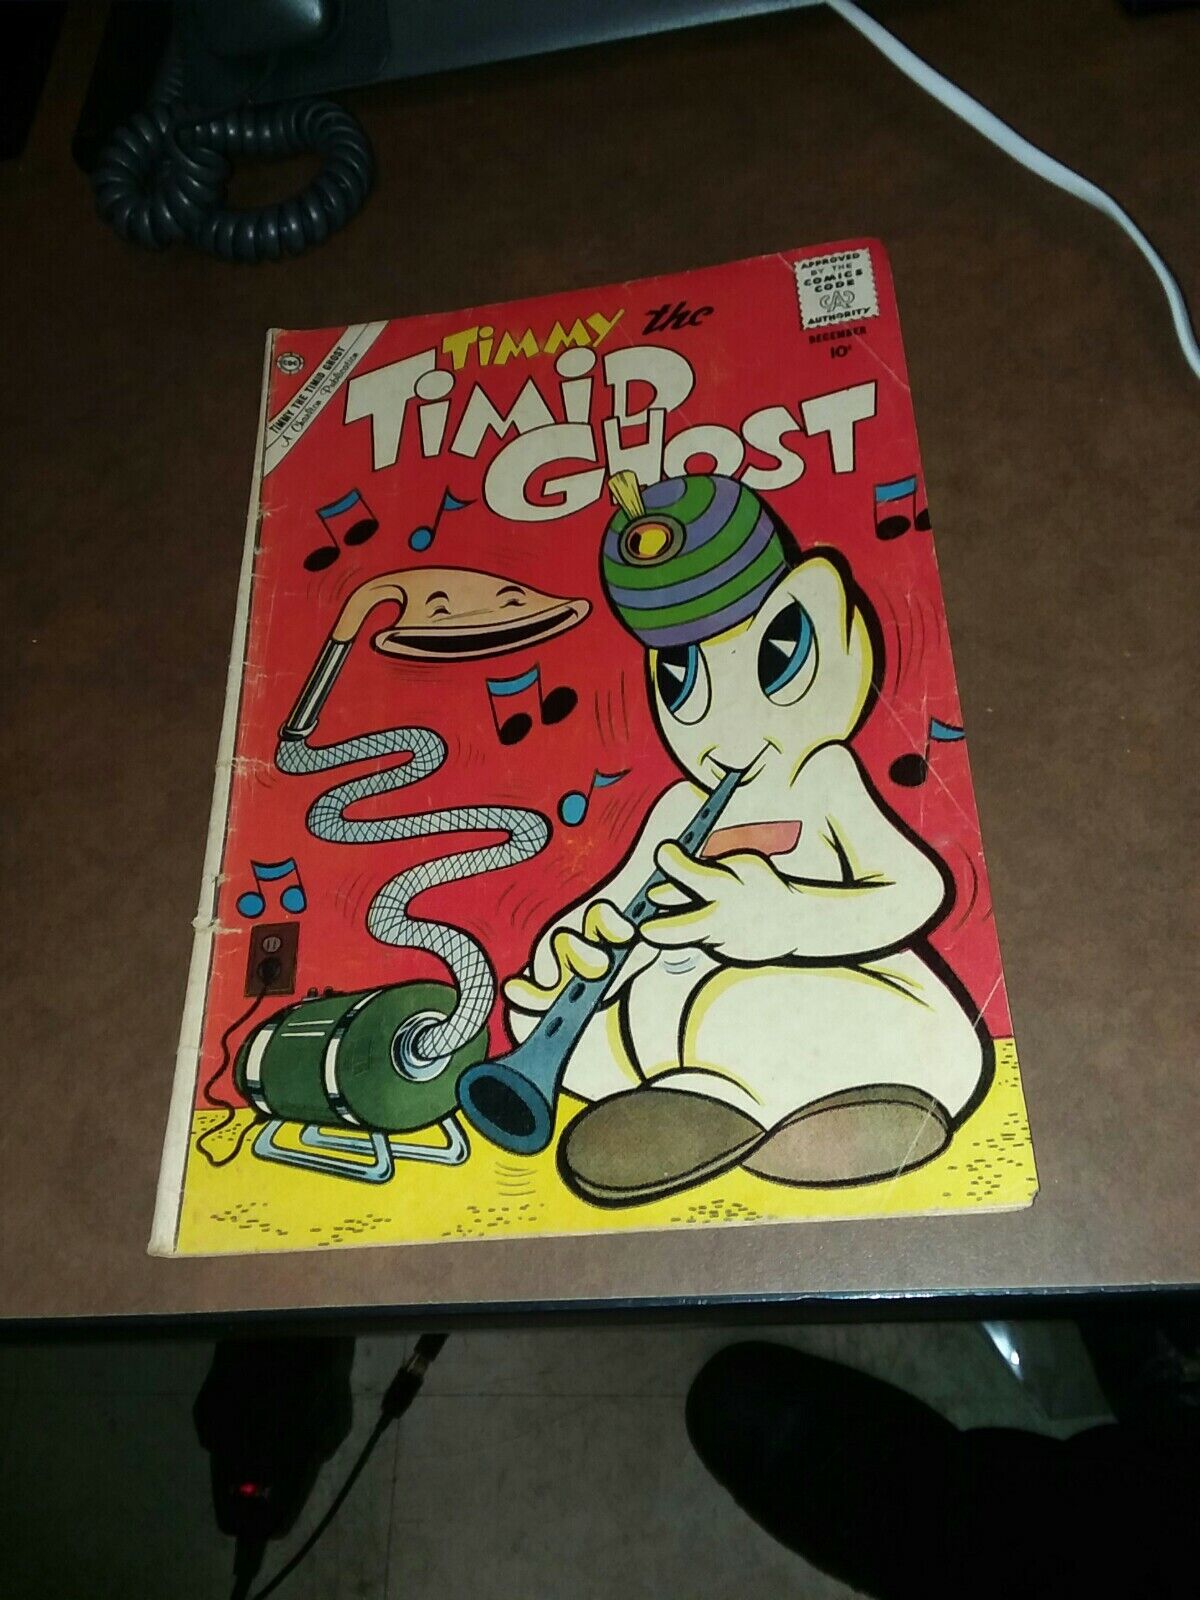 Timmy The Timid Ghost #24 charlton comics 1960 silver age cartoon vacuum cover